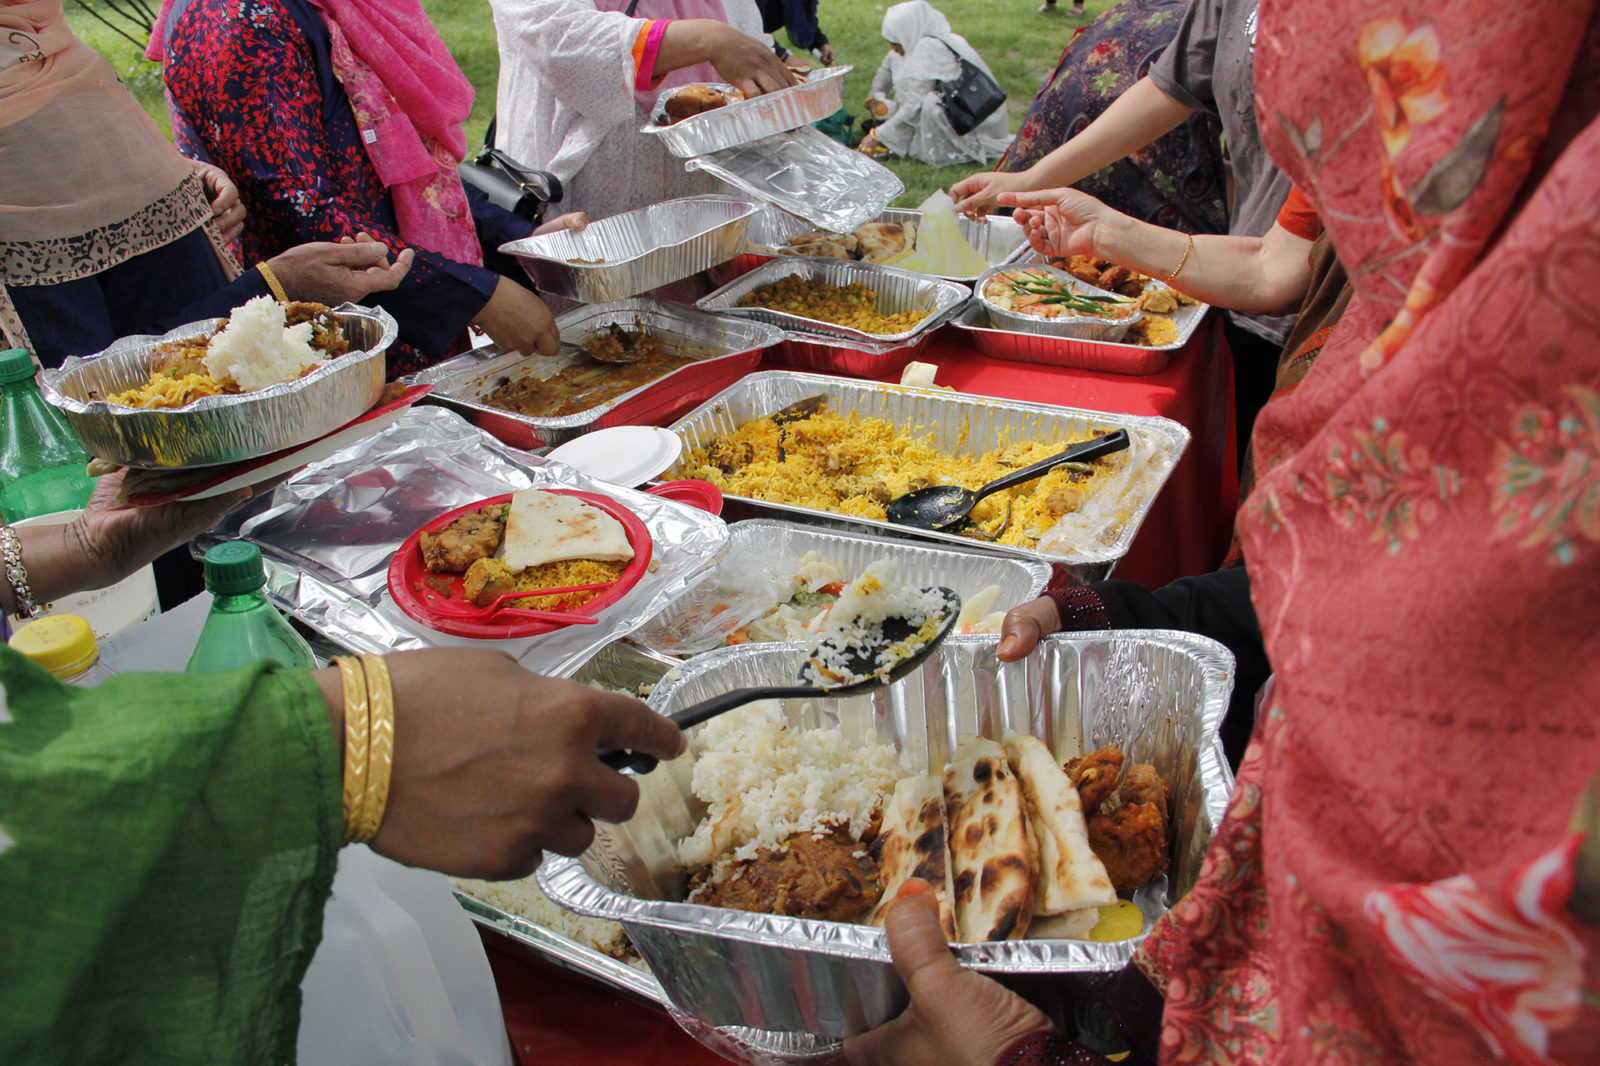 A photo of women serving themselves food at an outdoor gathering